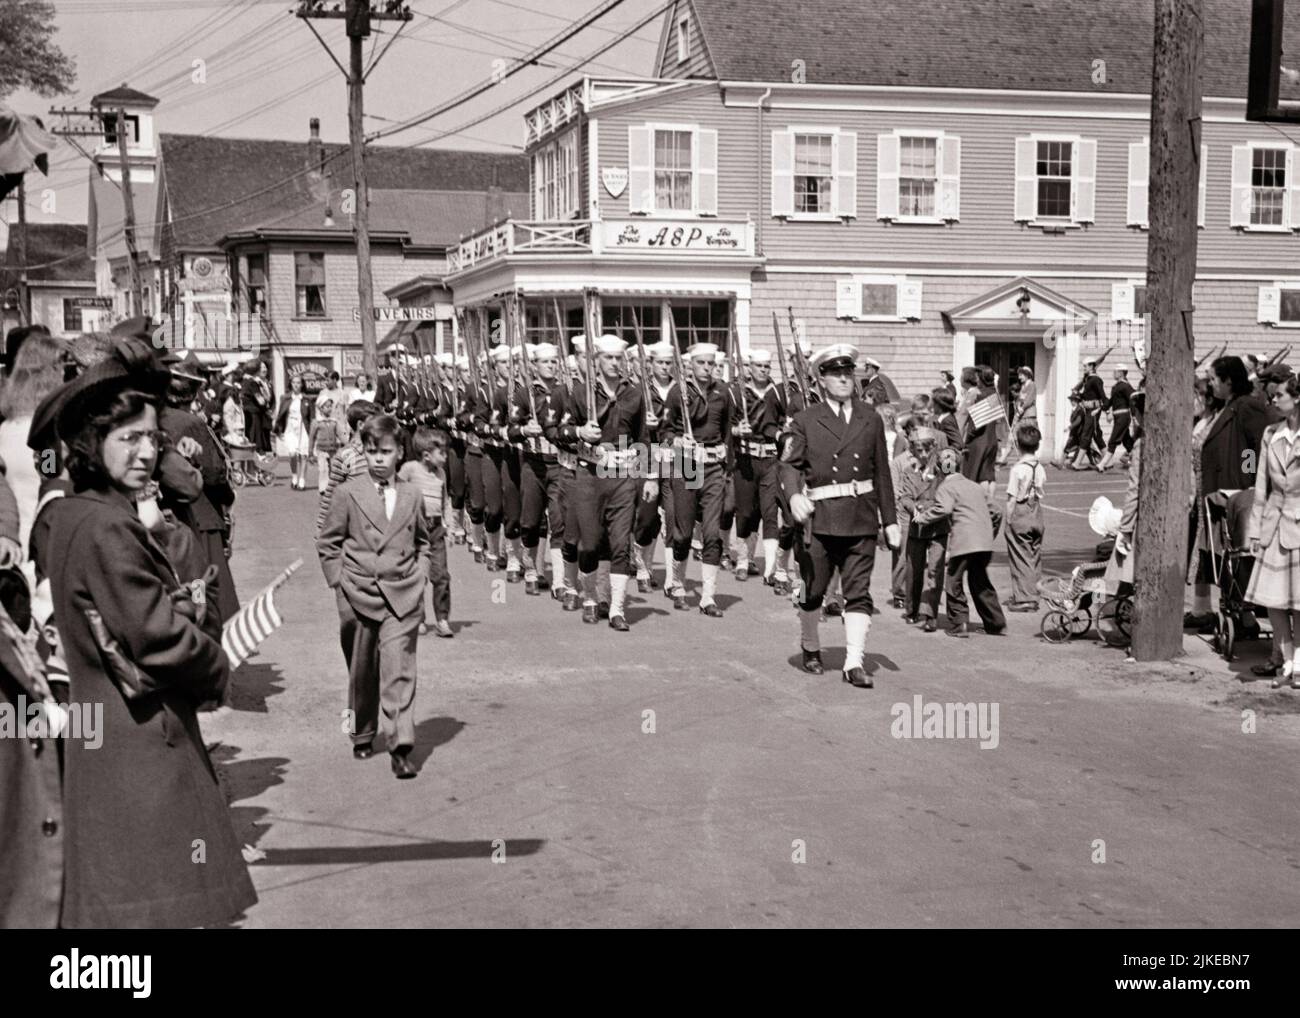 1940s 1950s FORMATION OF UNITED STATES COAST GUARD MEN ON PARADE IN PROVINCETOWN CAPE COD MASSACHUSETTS USA - q75040 CPC001 HARS OLD FASHIONED Stock Photo